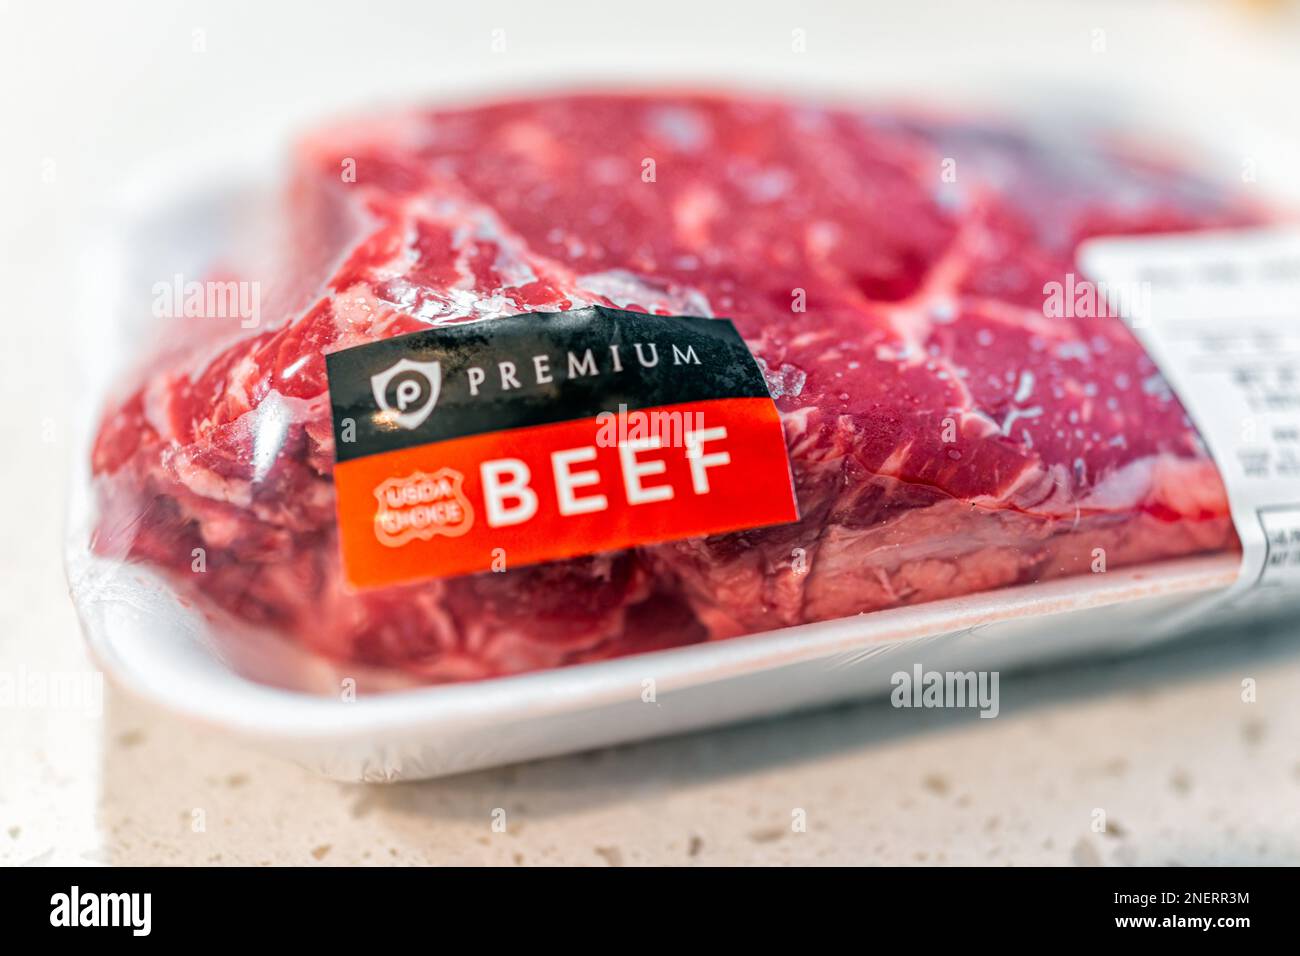 Naples, USA - November 29, 2021: Macro closeup of sign text of product for premium USDA choice beef from publix store brand packaged in plastic meat Stock Photo